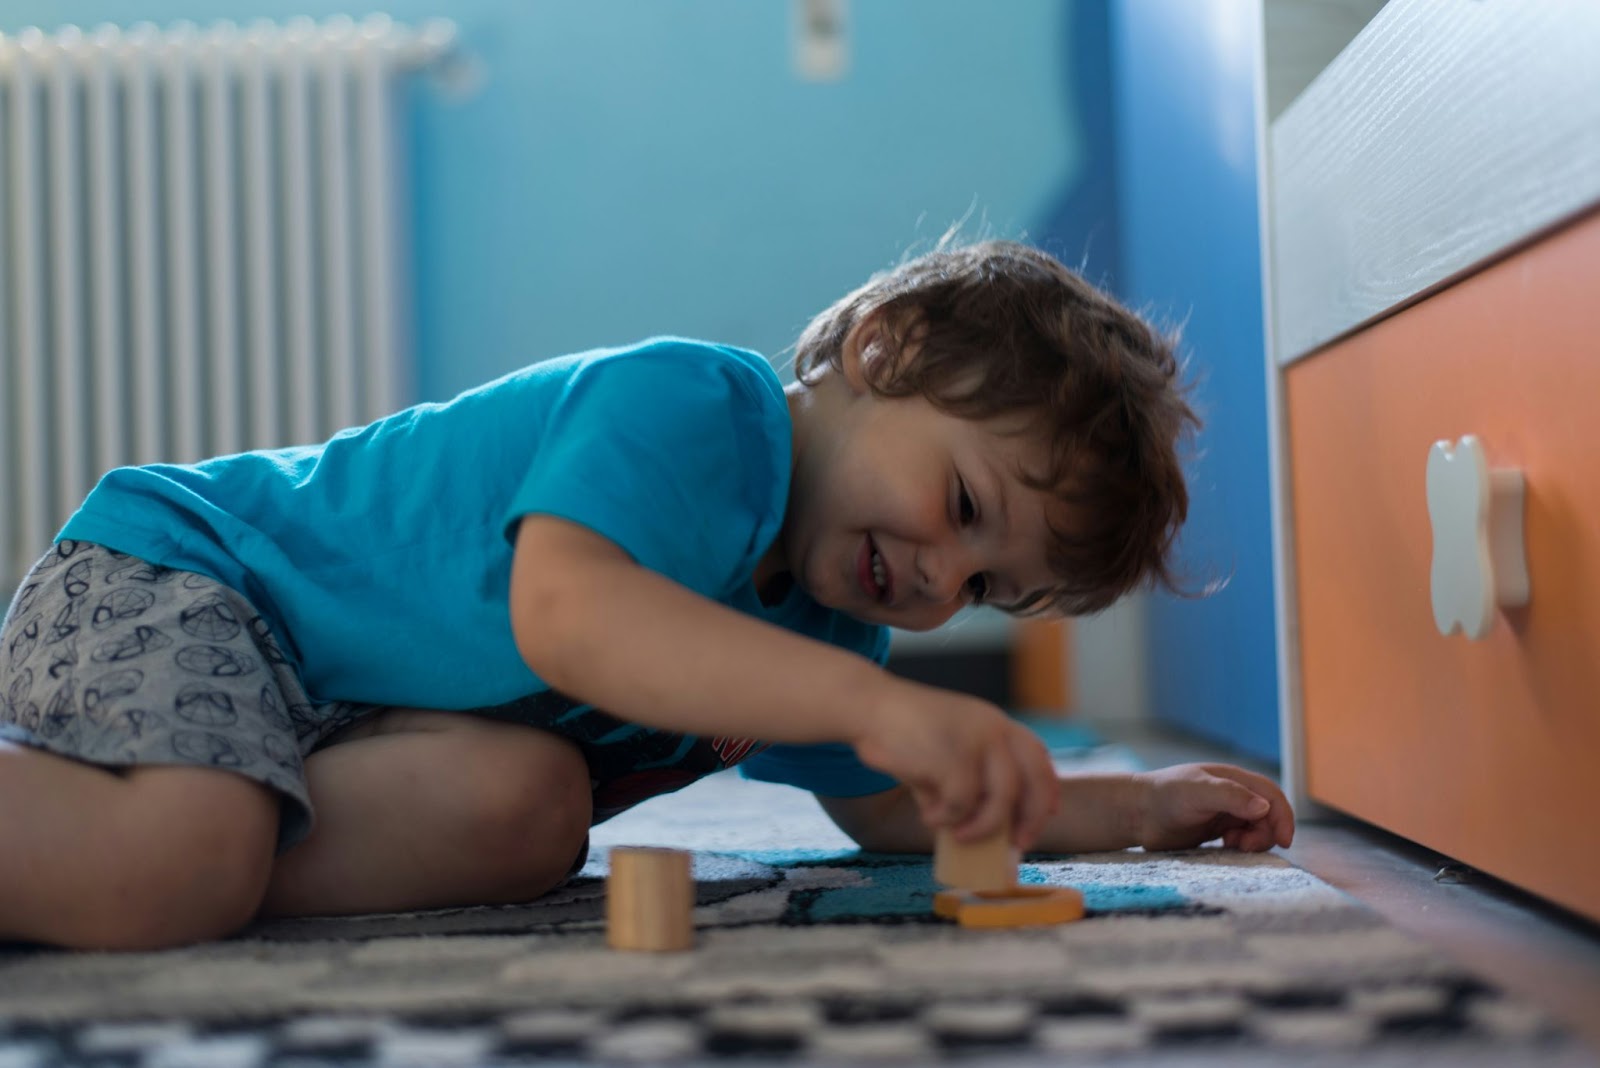 A young boy playing blocks on the floor